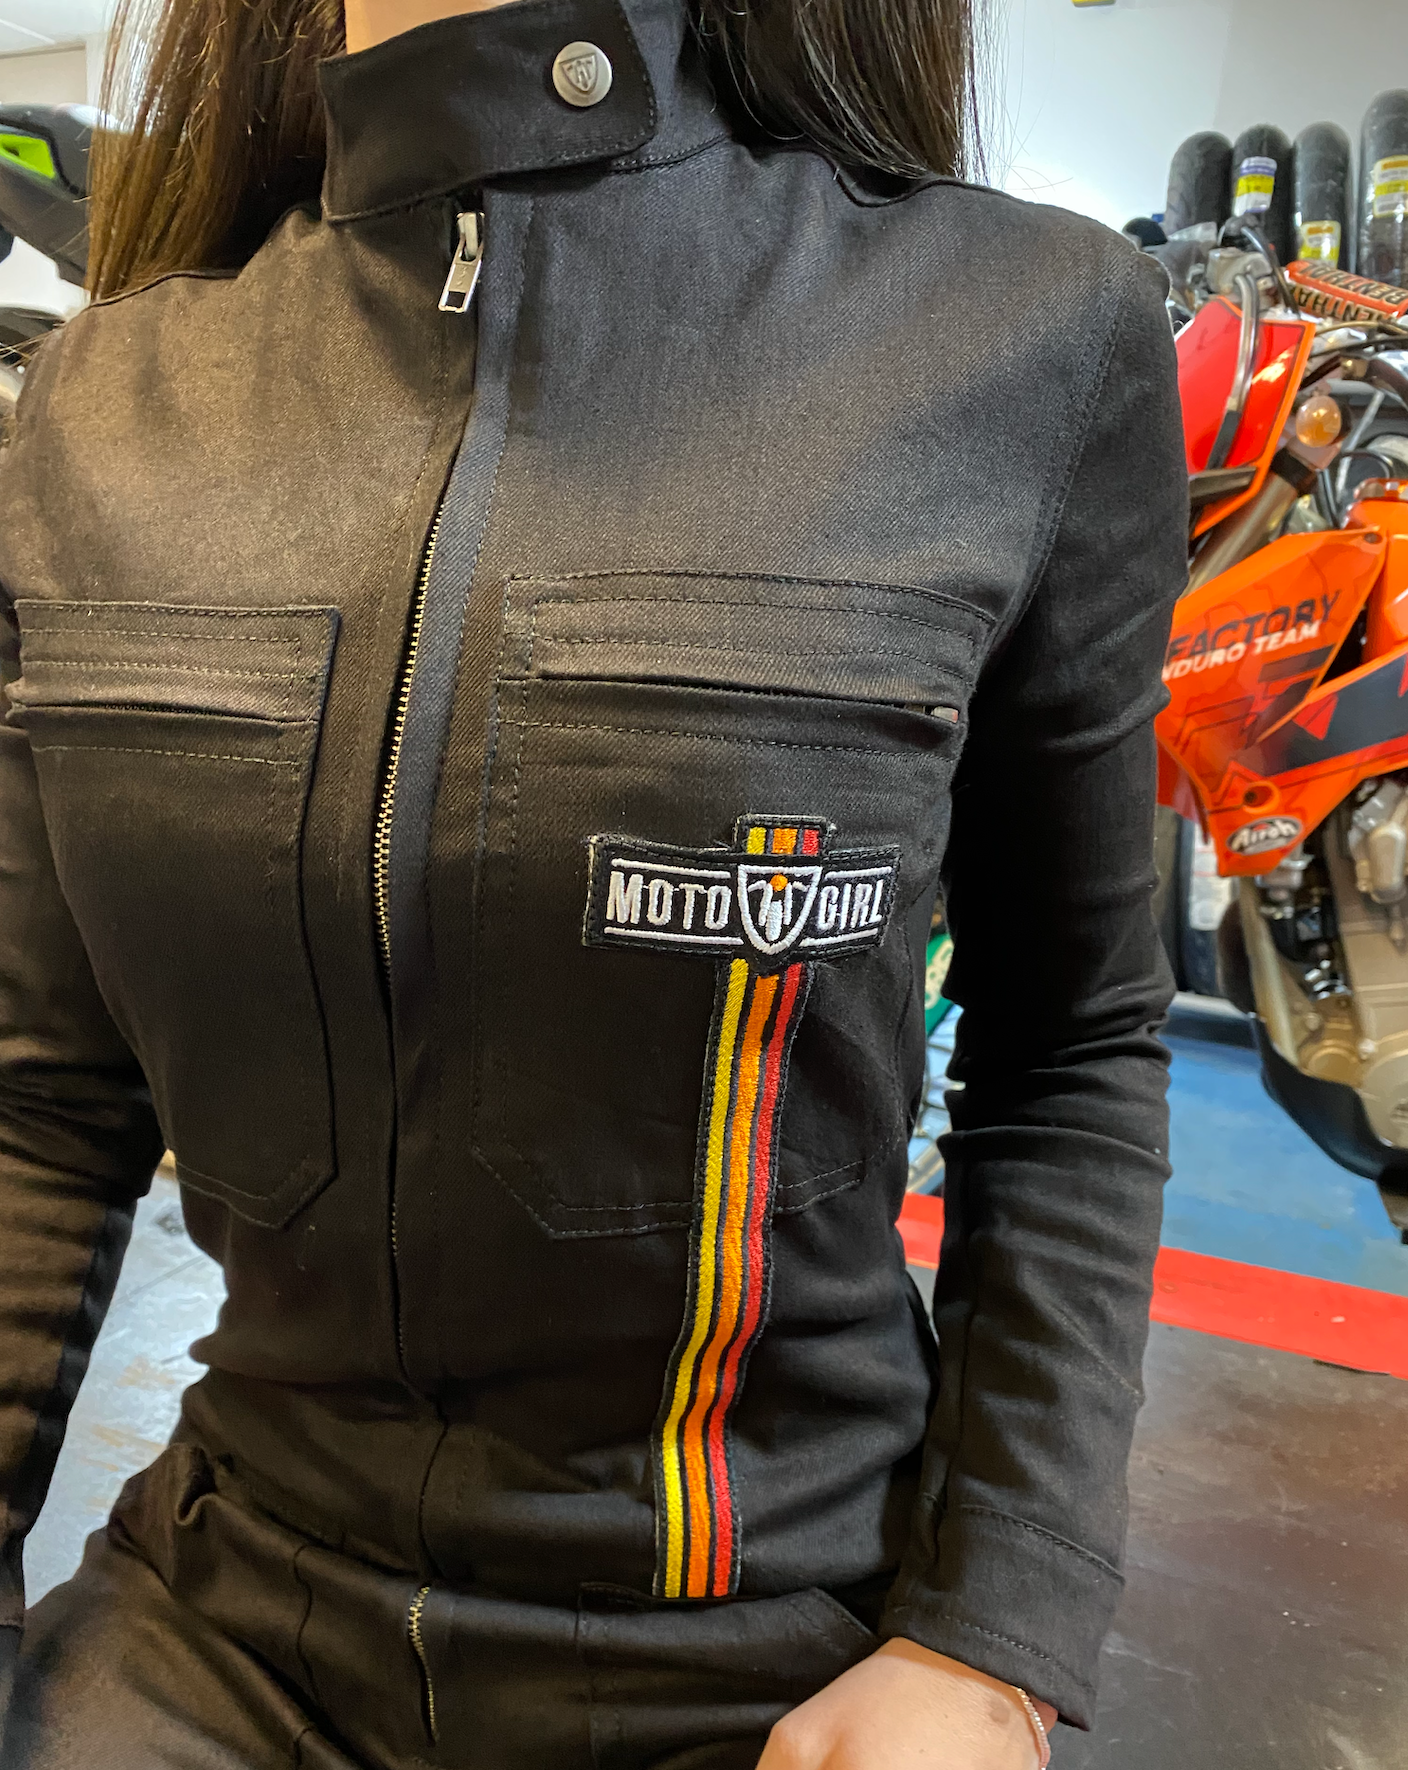 A close up of a woman&#39;s chest wearing black women&#39;s garage jumsuit with MotoGirl logo